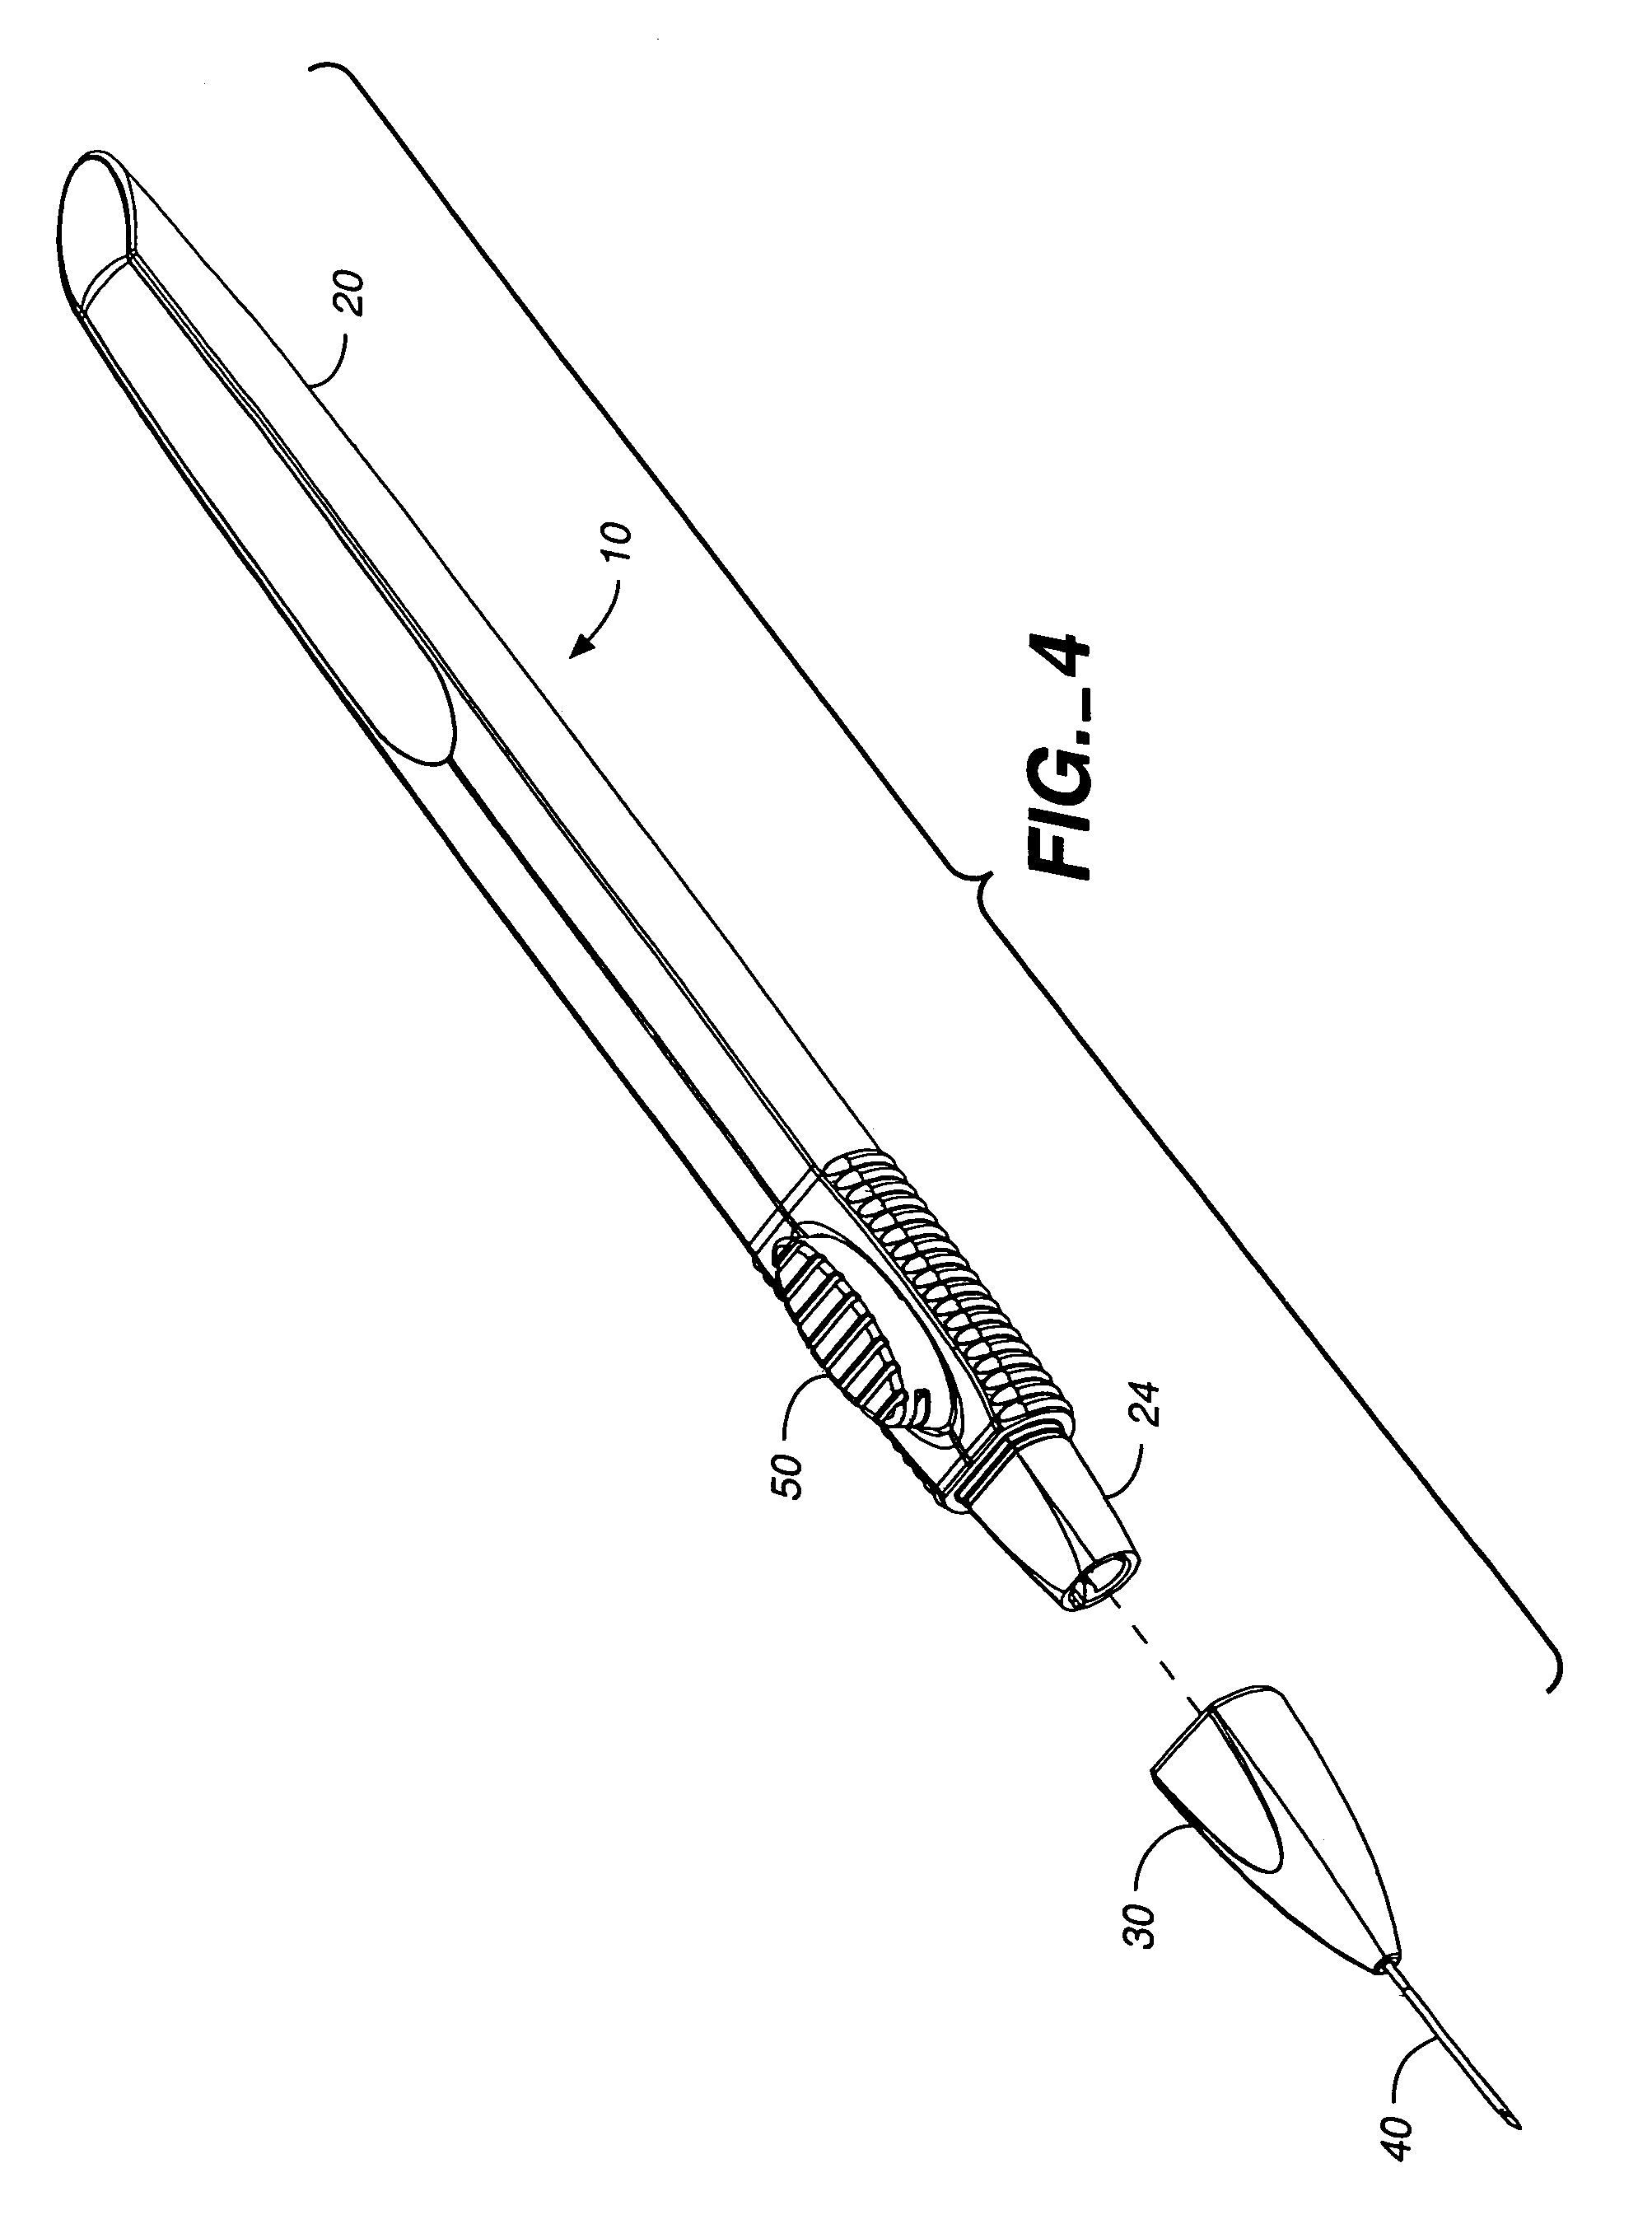 Apparatus for delivery of ocular implants